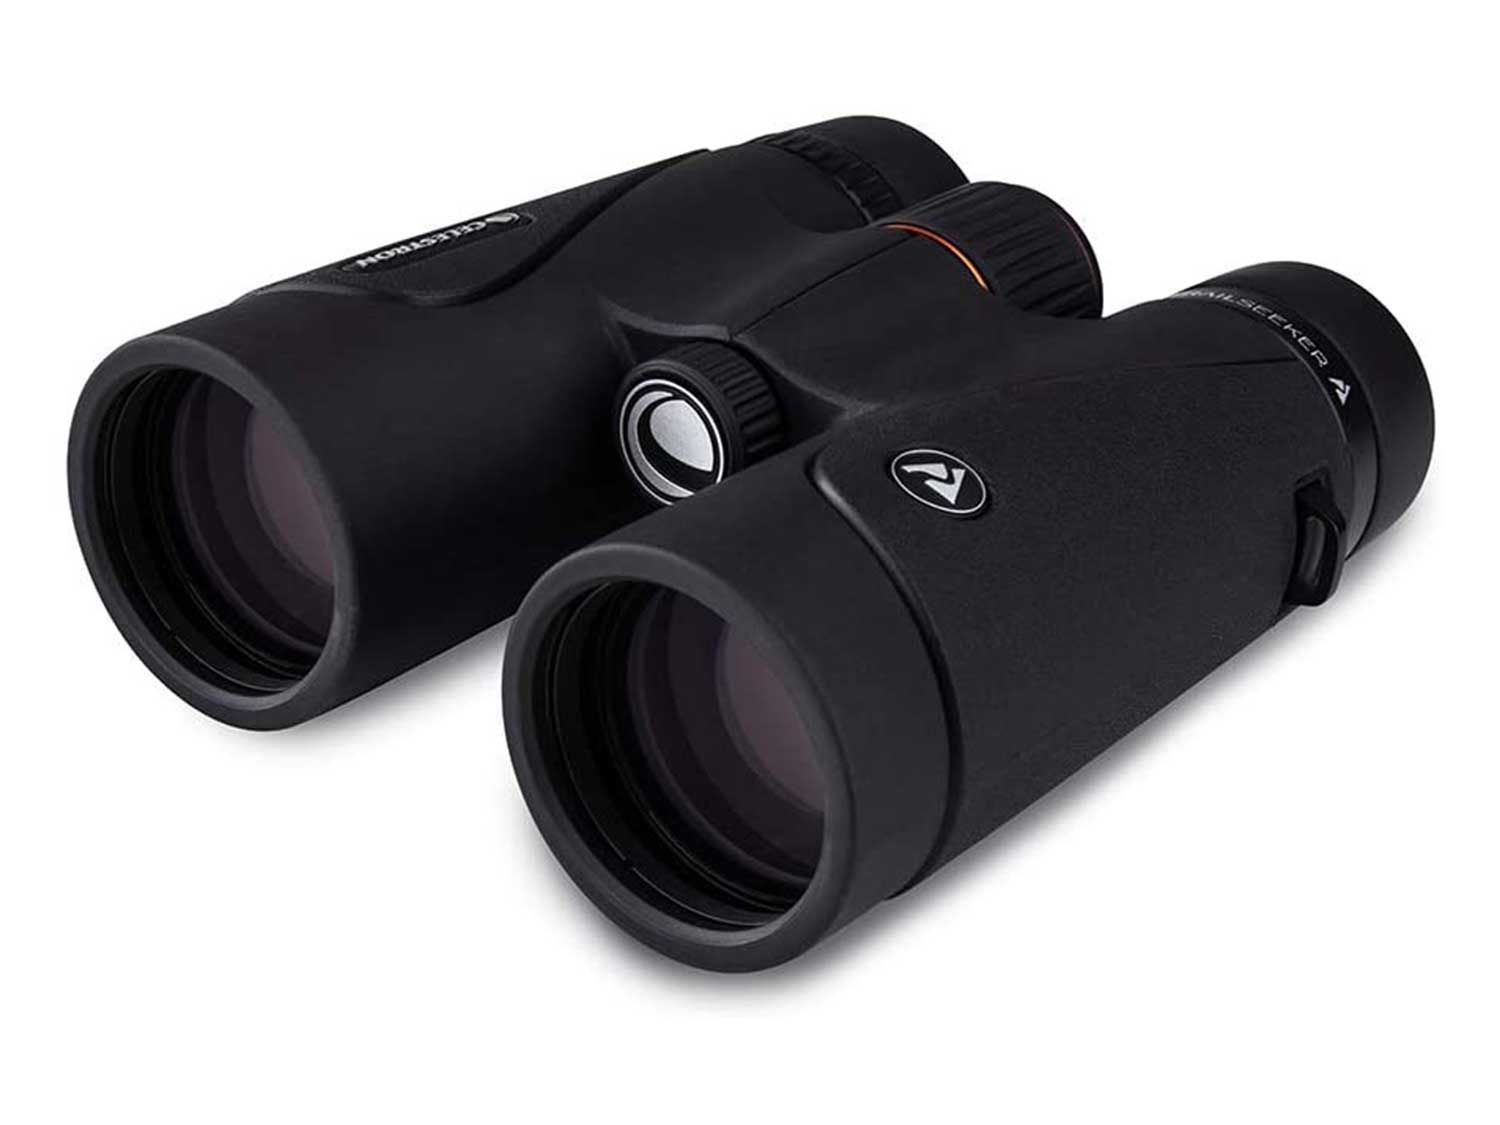 Celestron – TrailSeeker 10x42 Binoculars – Fully Multi-Coated Optics – Binoculars for Adults – Phase and Dielectric Coated BaK-4 Prisms – Waterproof & Fogproof – Rubber Armored – 6.5 Feet Close Focus